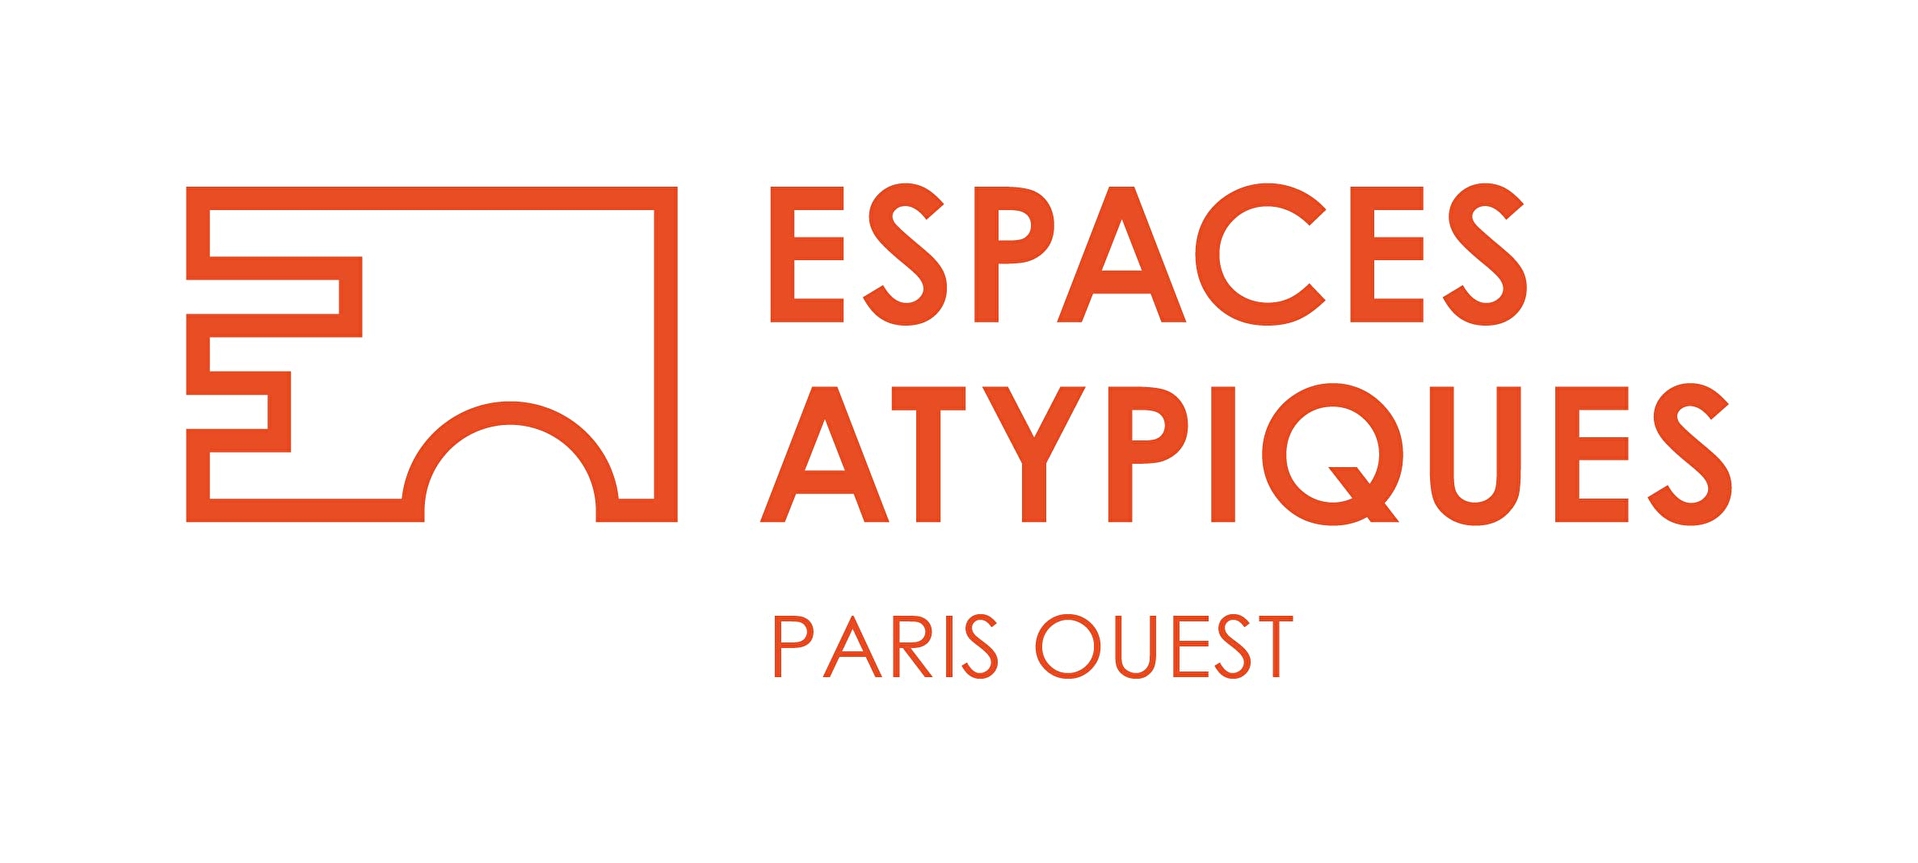 ESPACES ATYPIQUES Paris - ESPACES ATYPIQUES Paris - Ouest